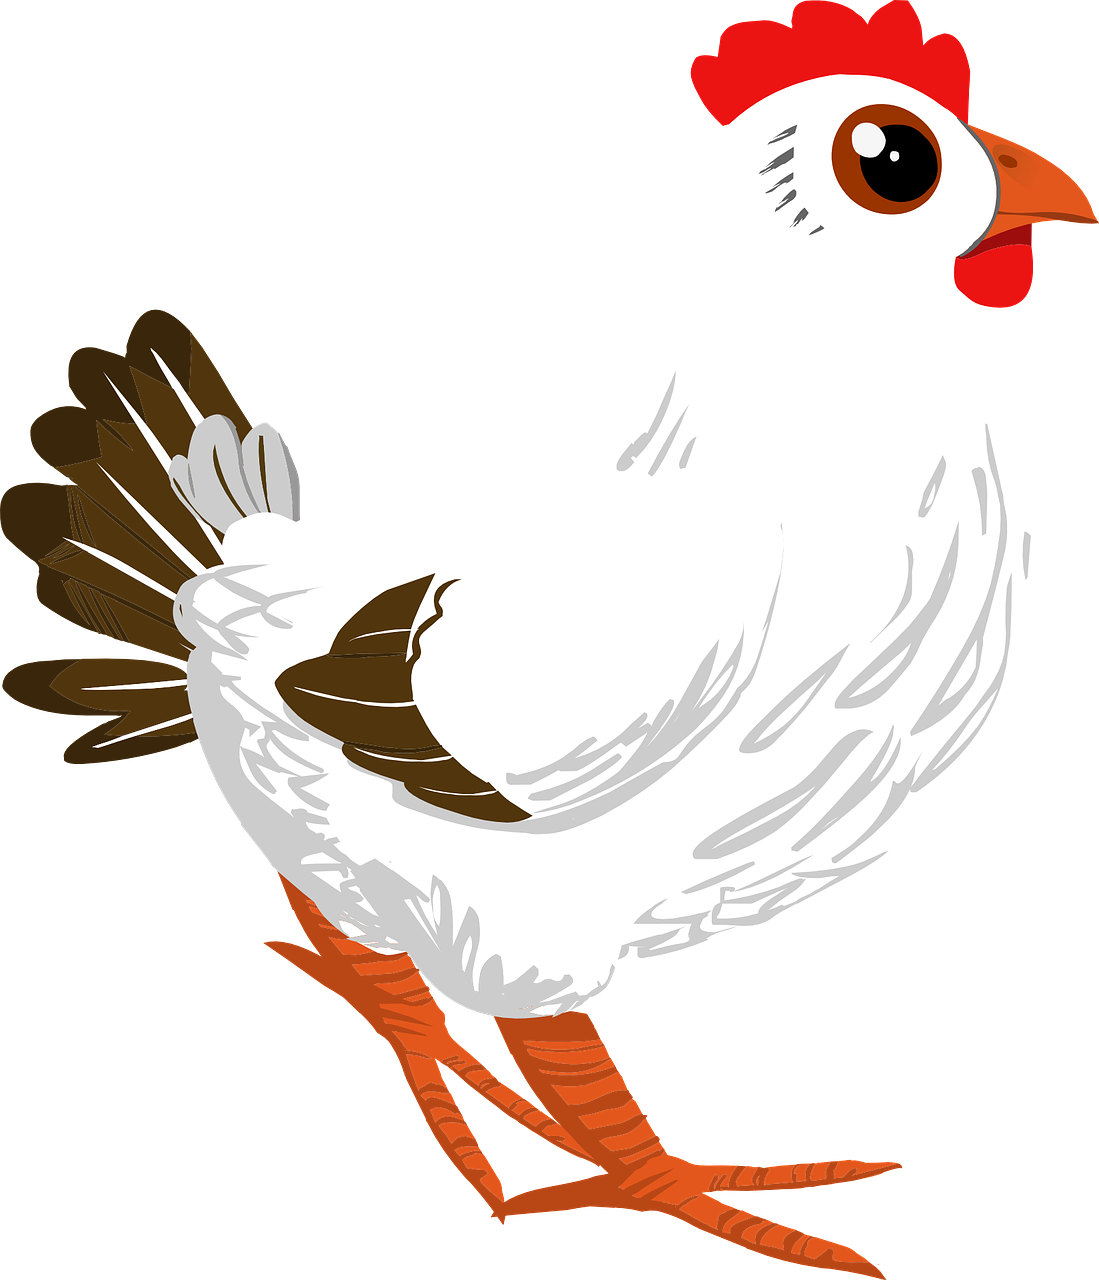 a close up of a chicken on a black background, an illustration of, courful illustration, lineless, white with black spots, full length view